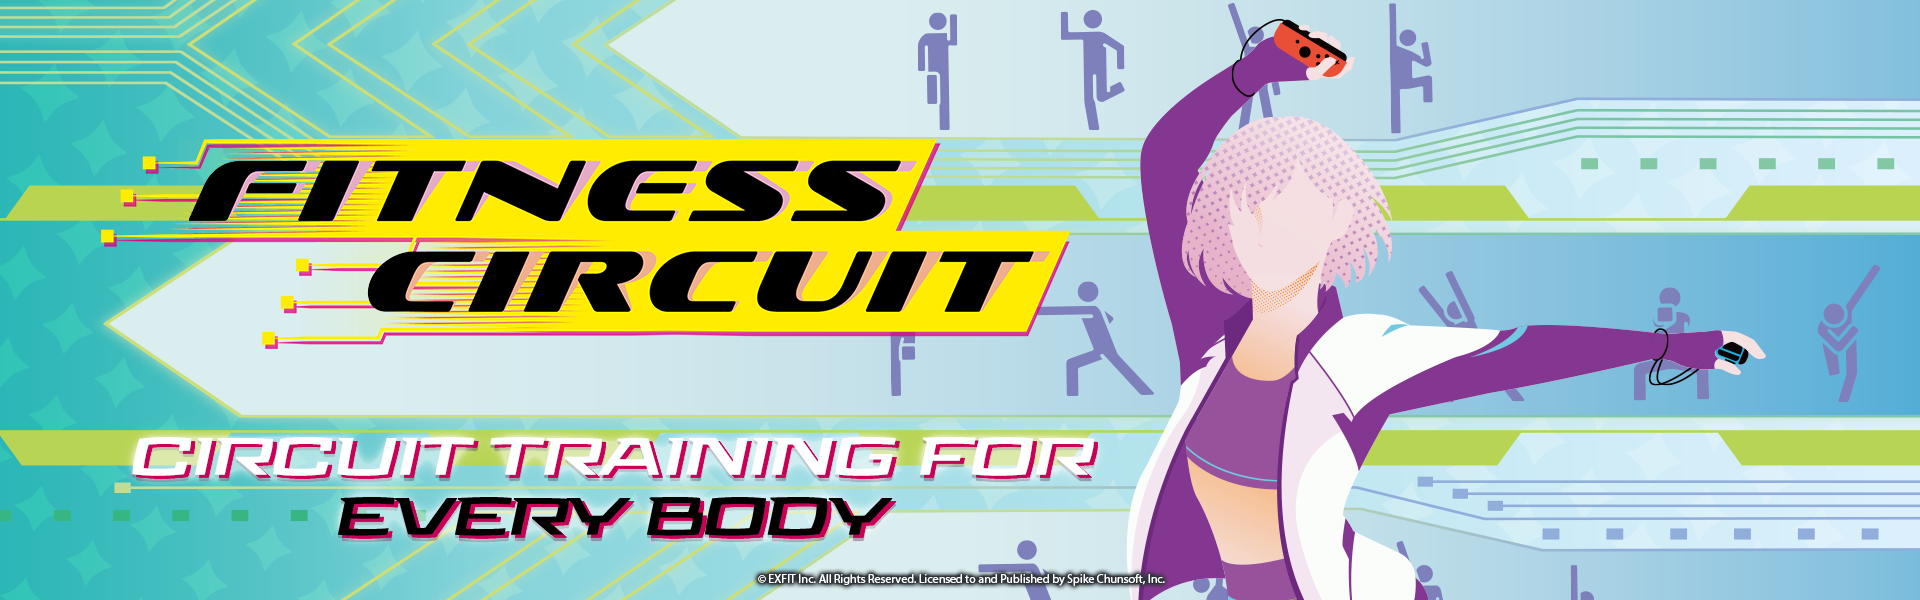 The key art for Fitness Circuit.